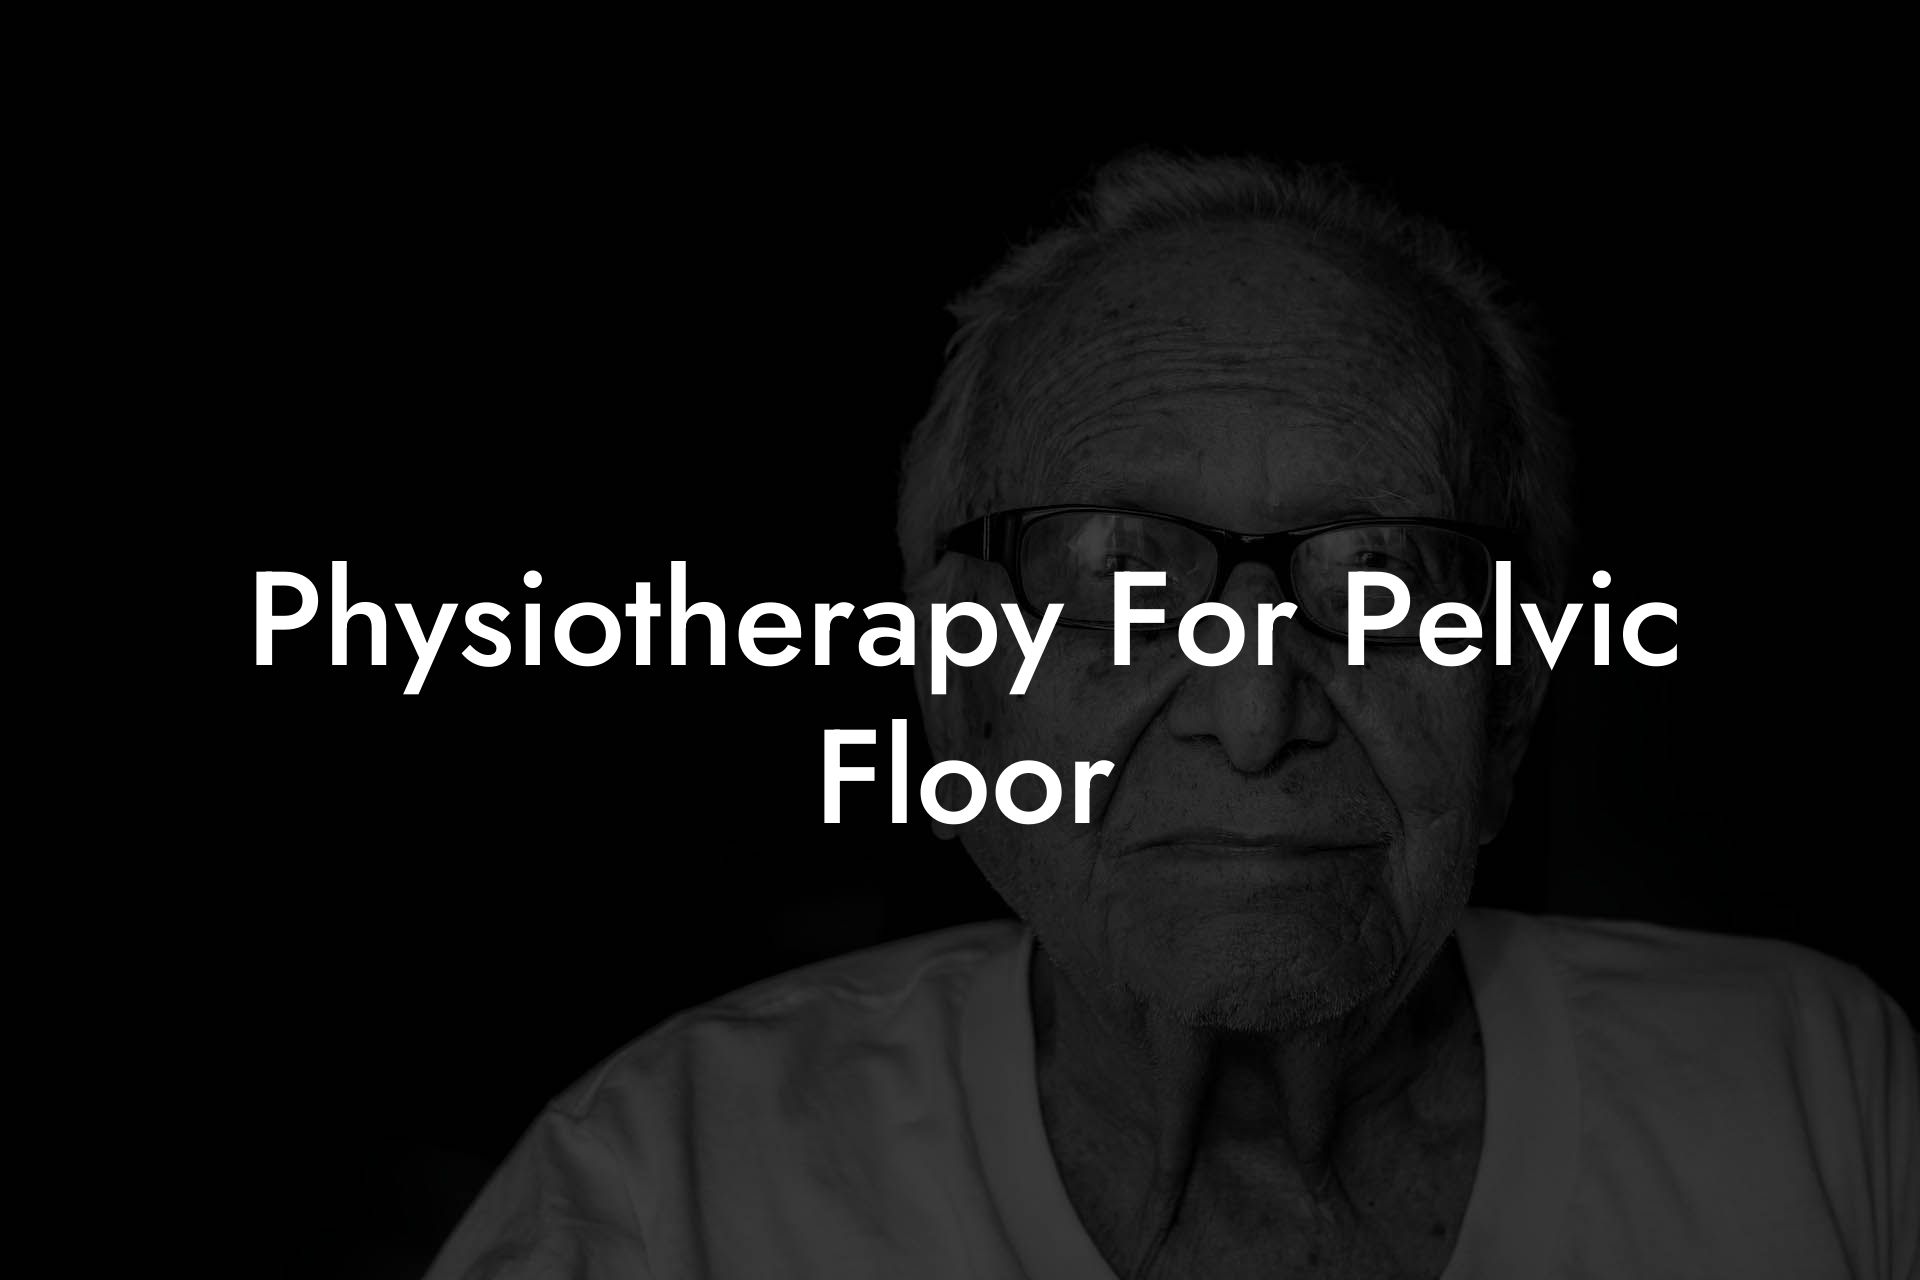 Physiotherapy For Pelvic Floor